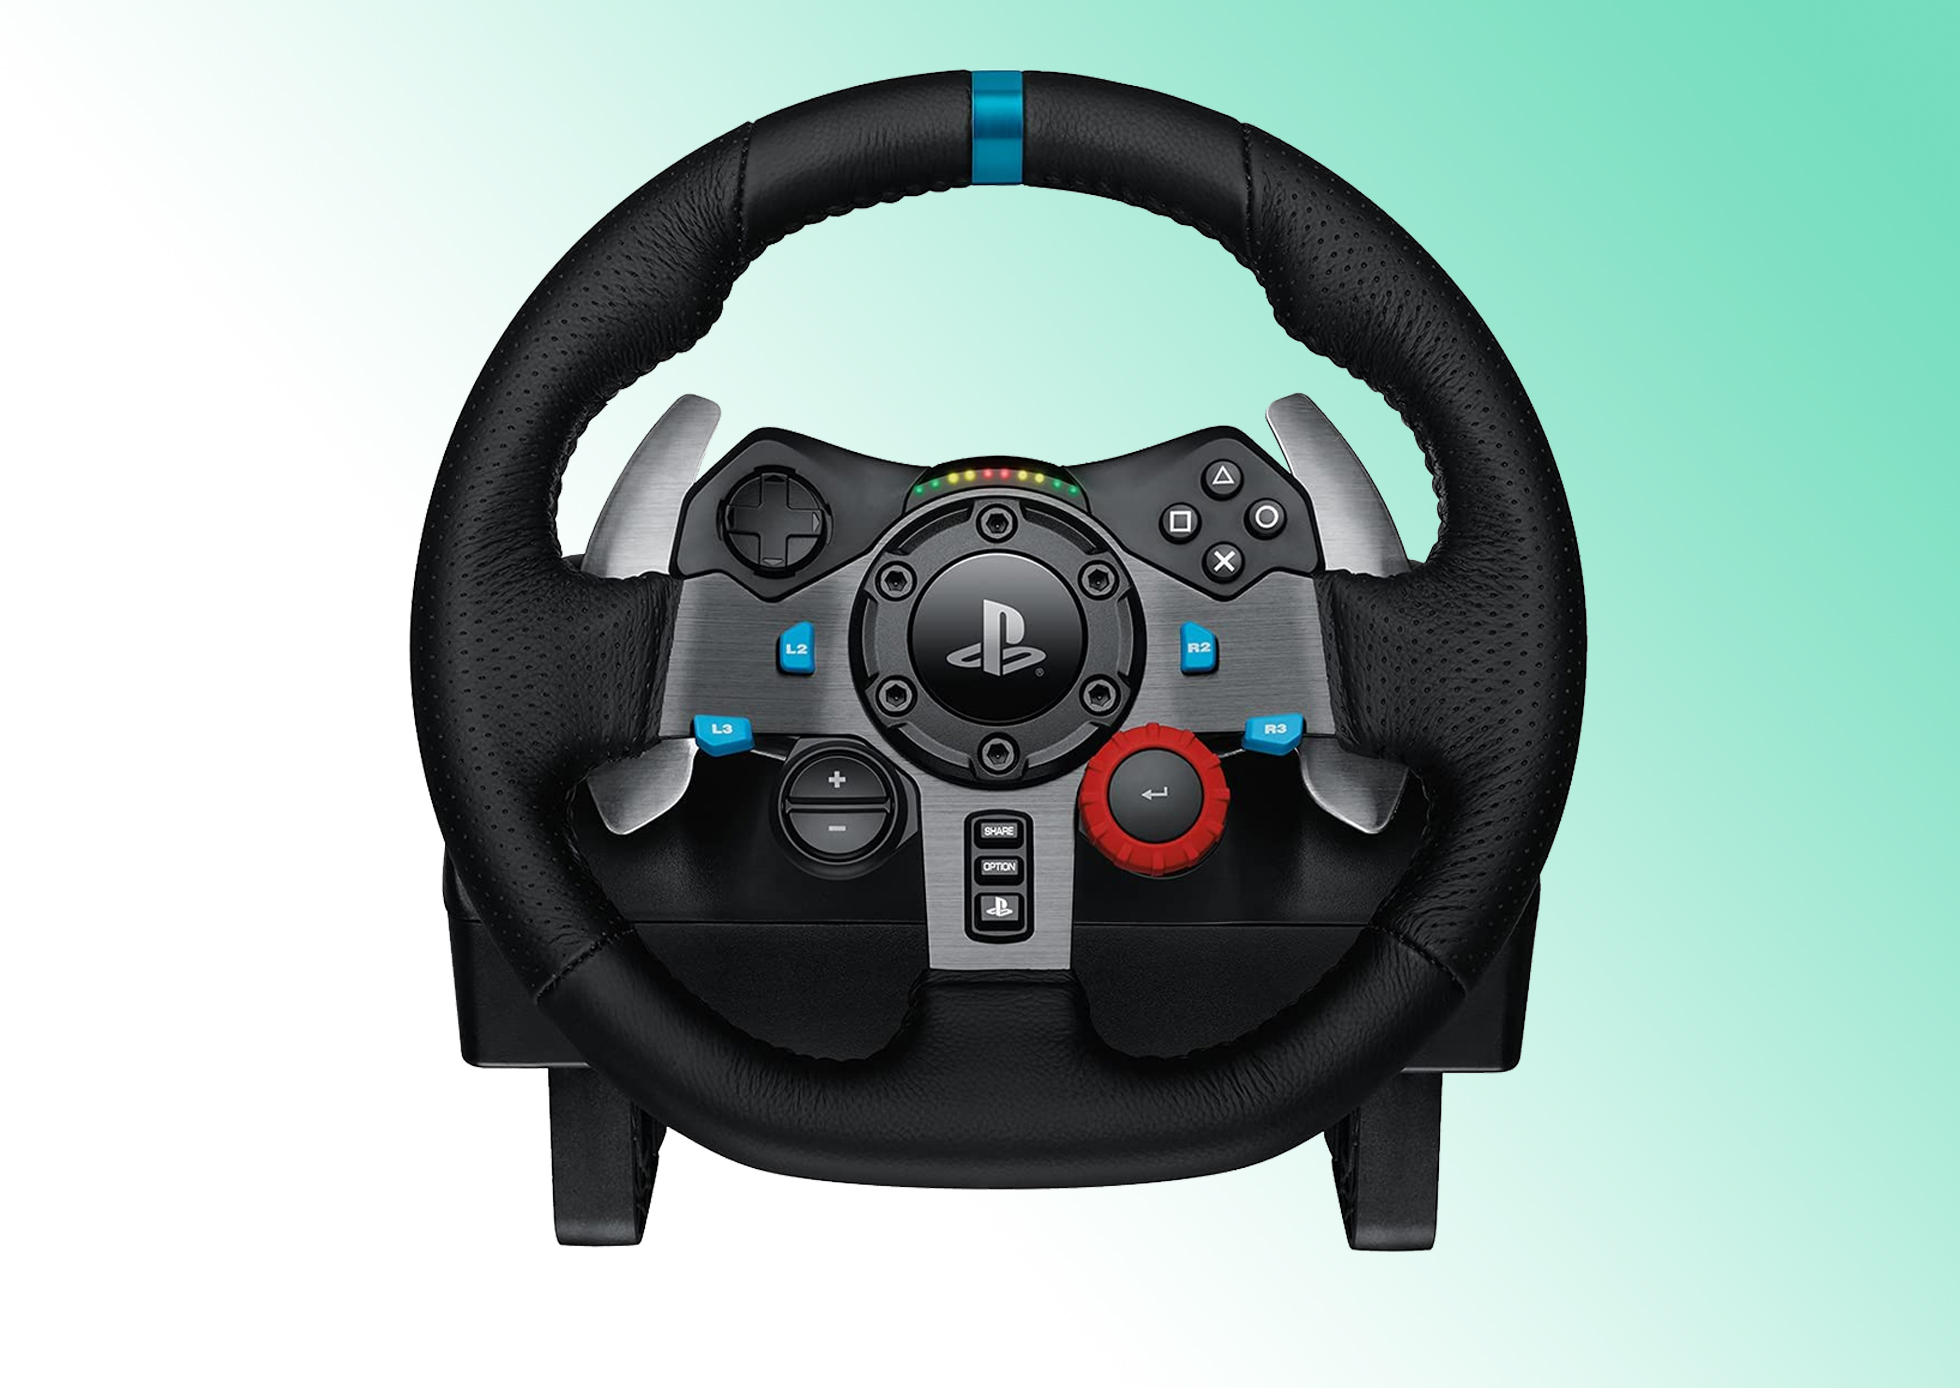 Logitech G29 steering wheel test and review